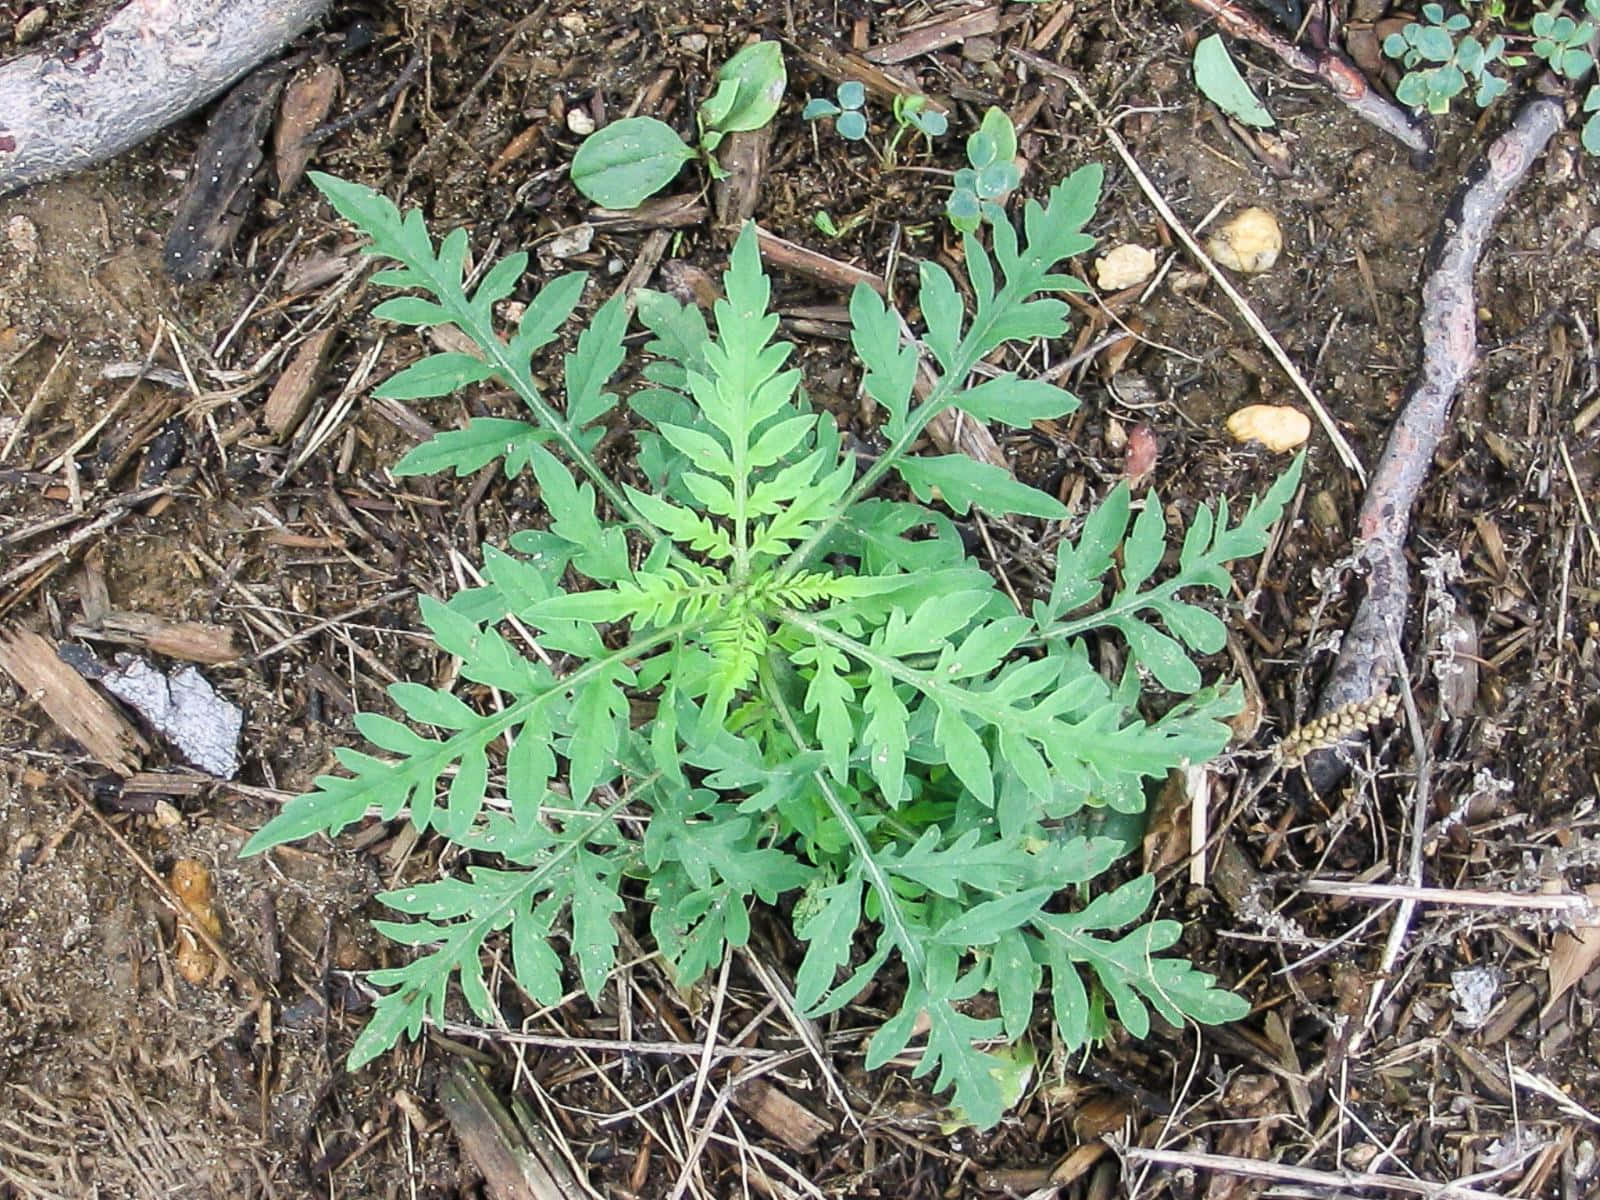 A ragweed plant surrounded by the fall colors of yellow and orange